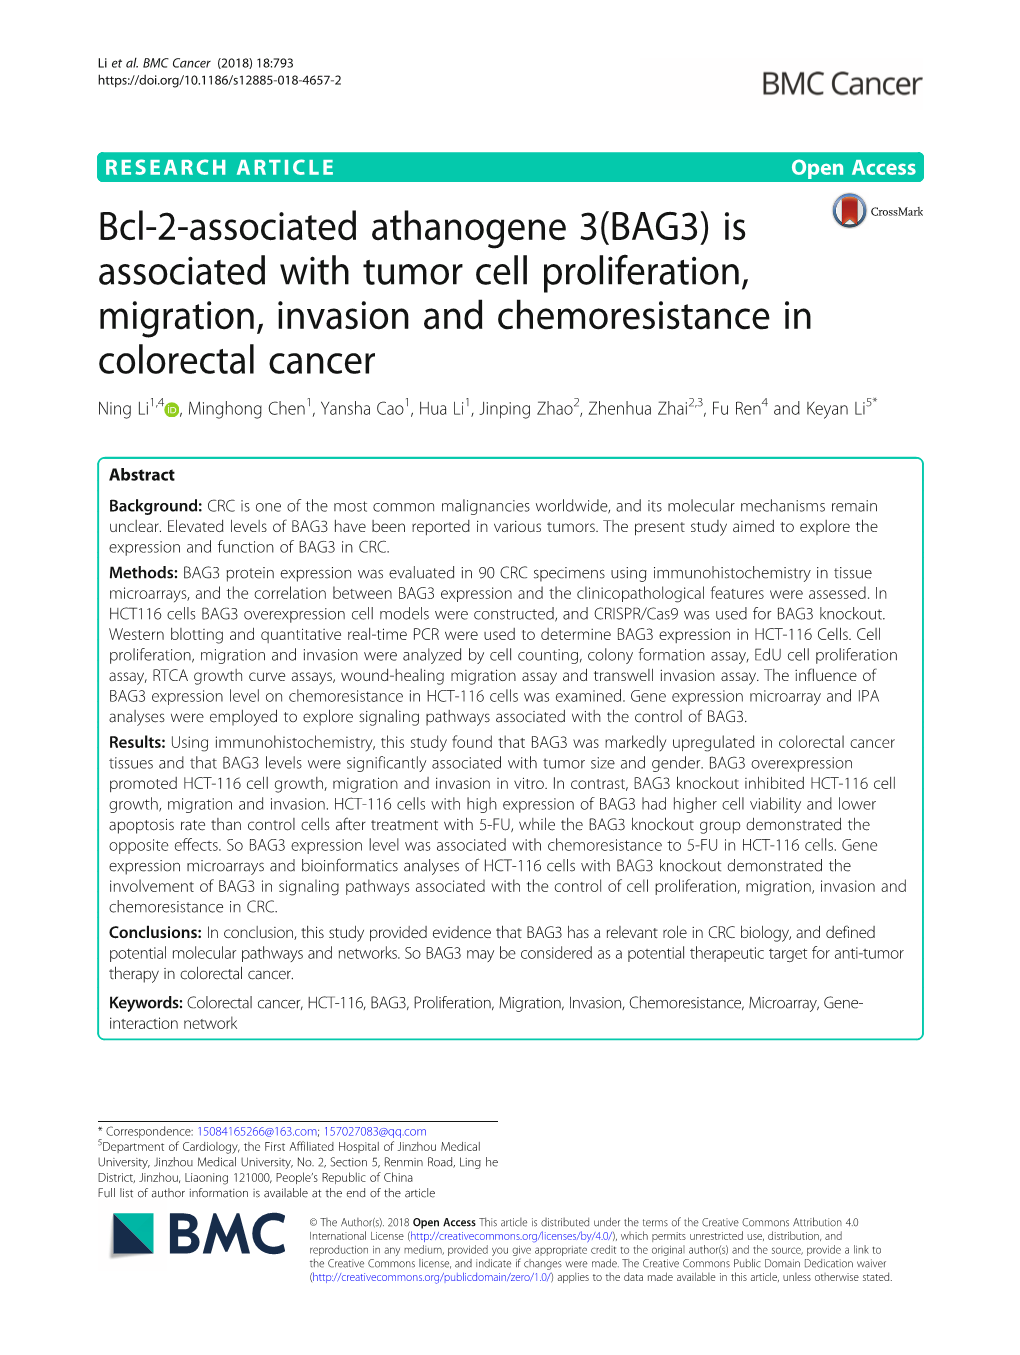 Bcl-2-Associated Athanogene 3(BAG3) Is Associated with Tumor